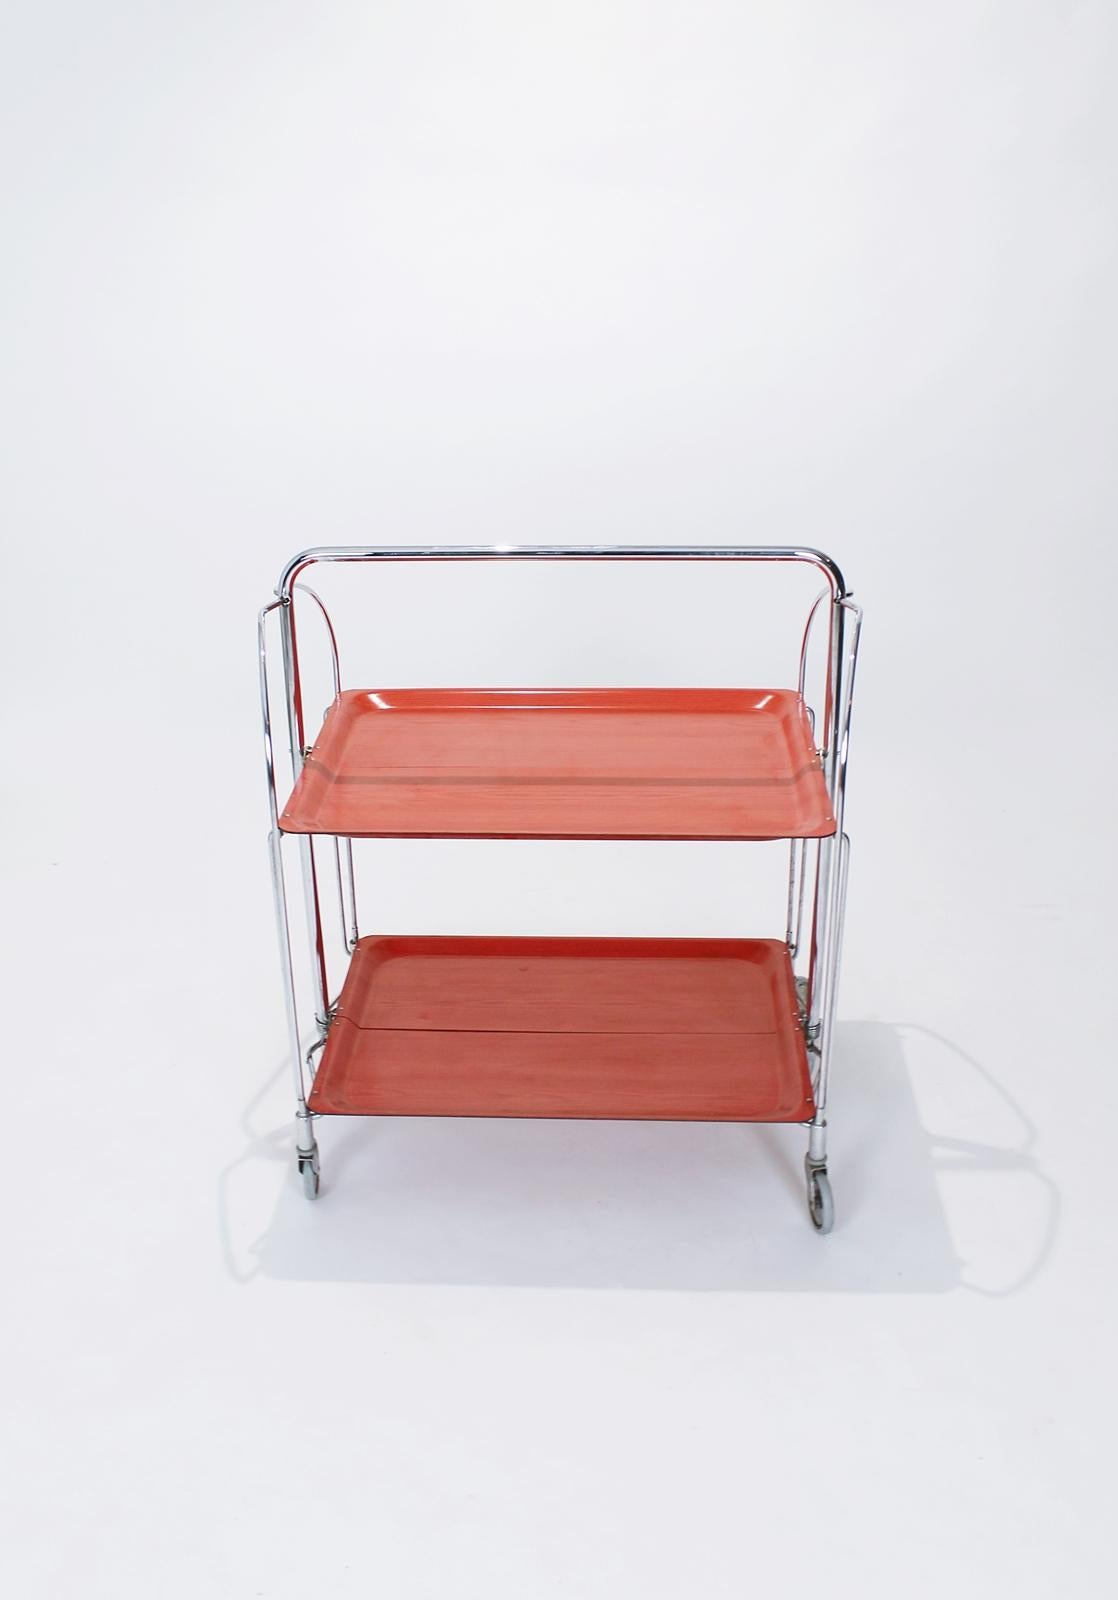 This serving trolley can also be used as a side table, when half folded.
In fine, well-functioning condition.
The frame is made of chrome-plated tube, the panel is made of Resopal. Chrome-plated castors, Versatile living room accessory. In good